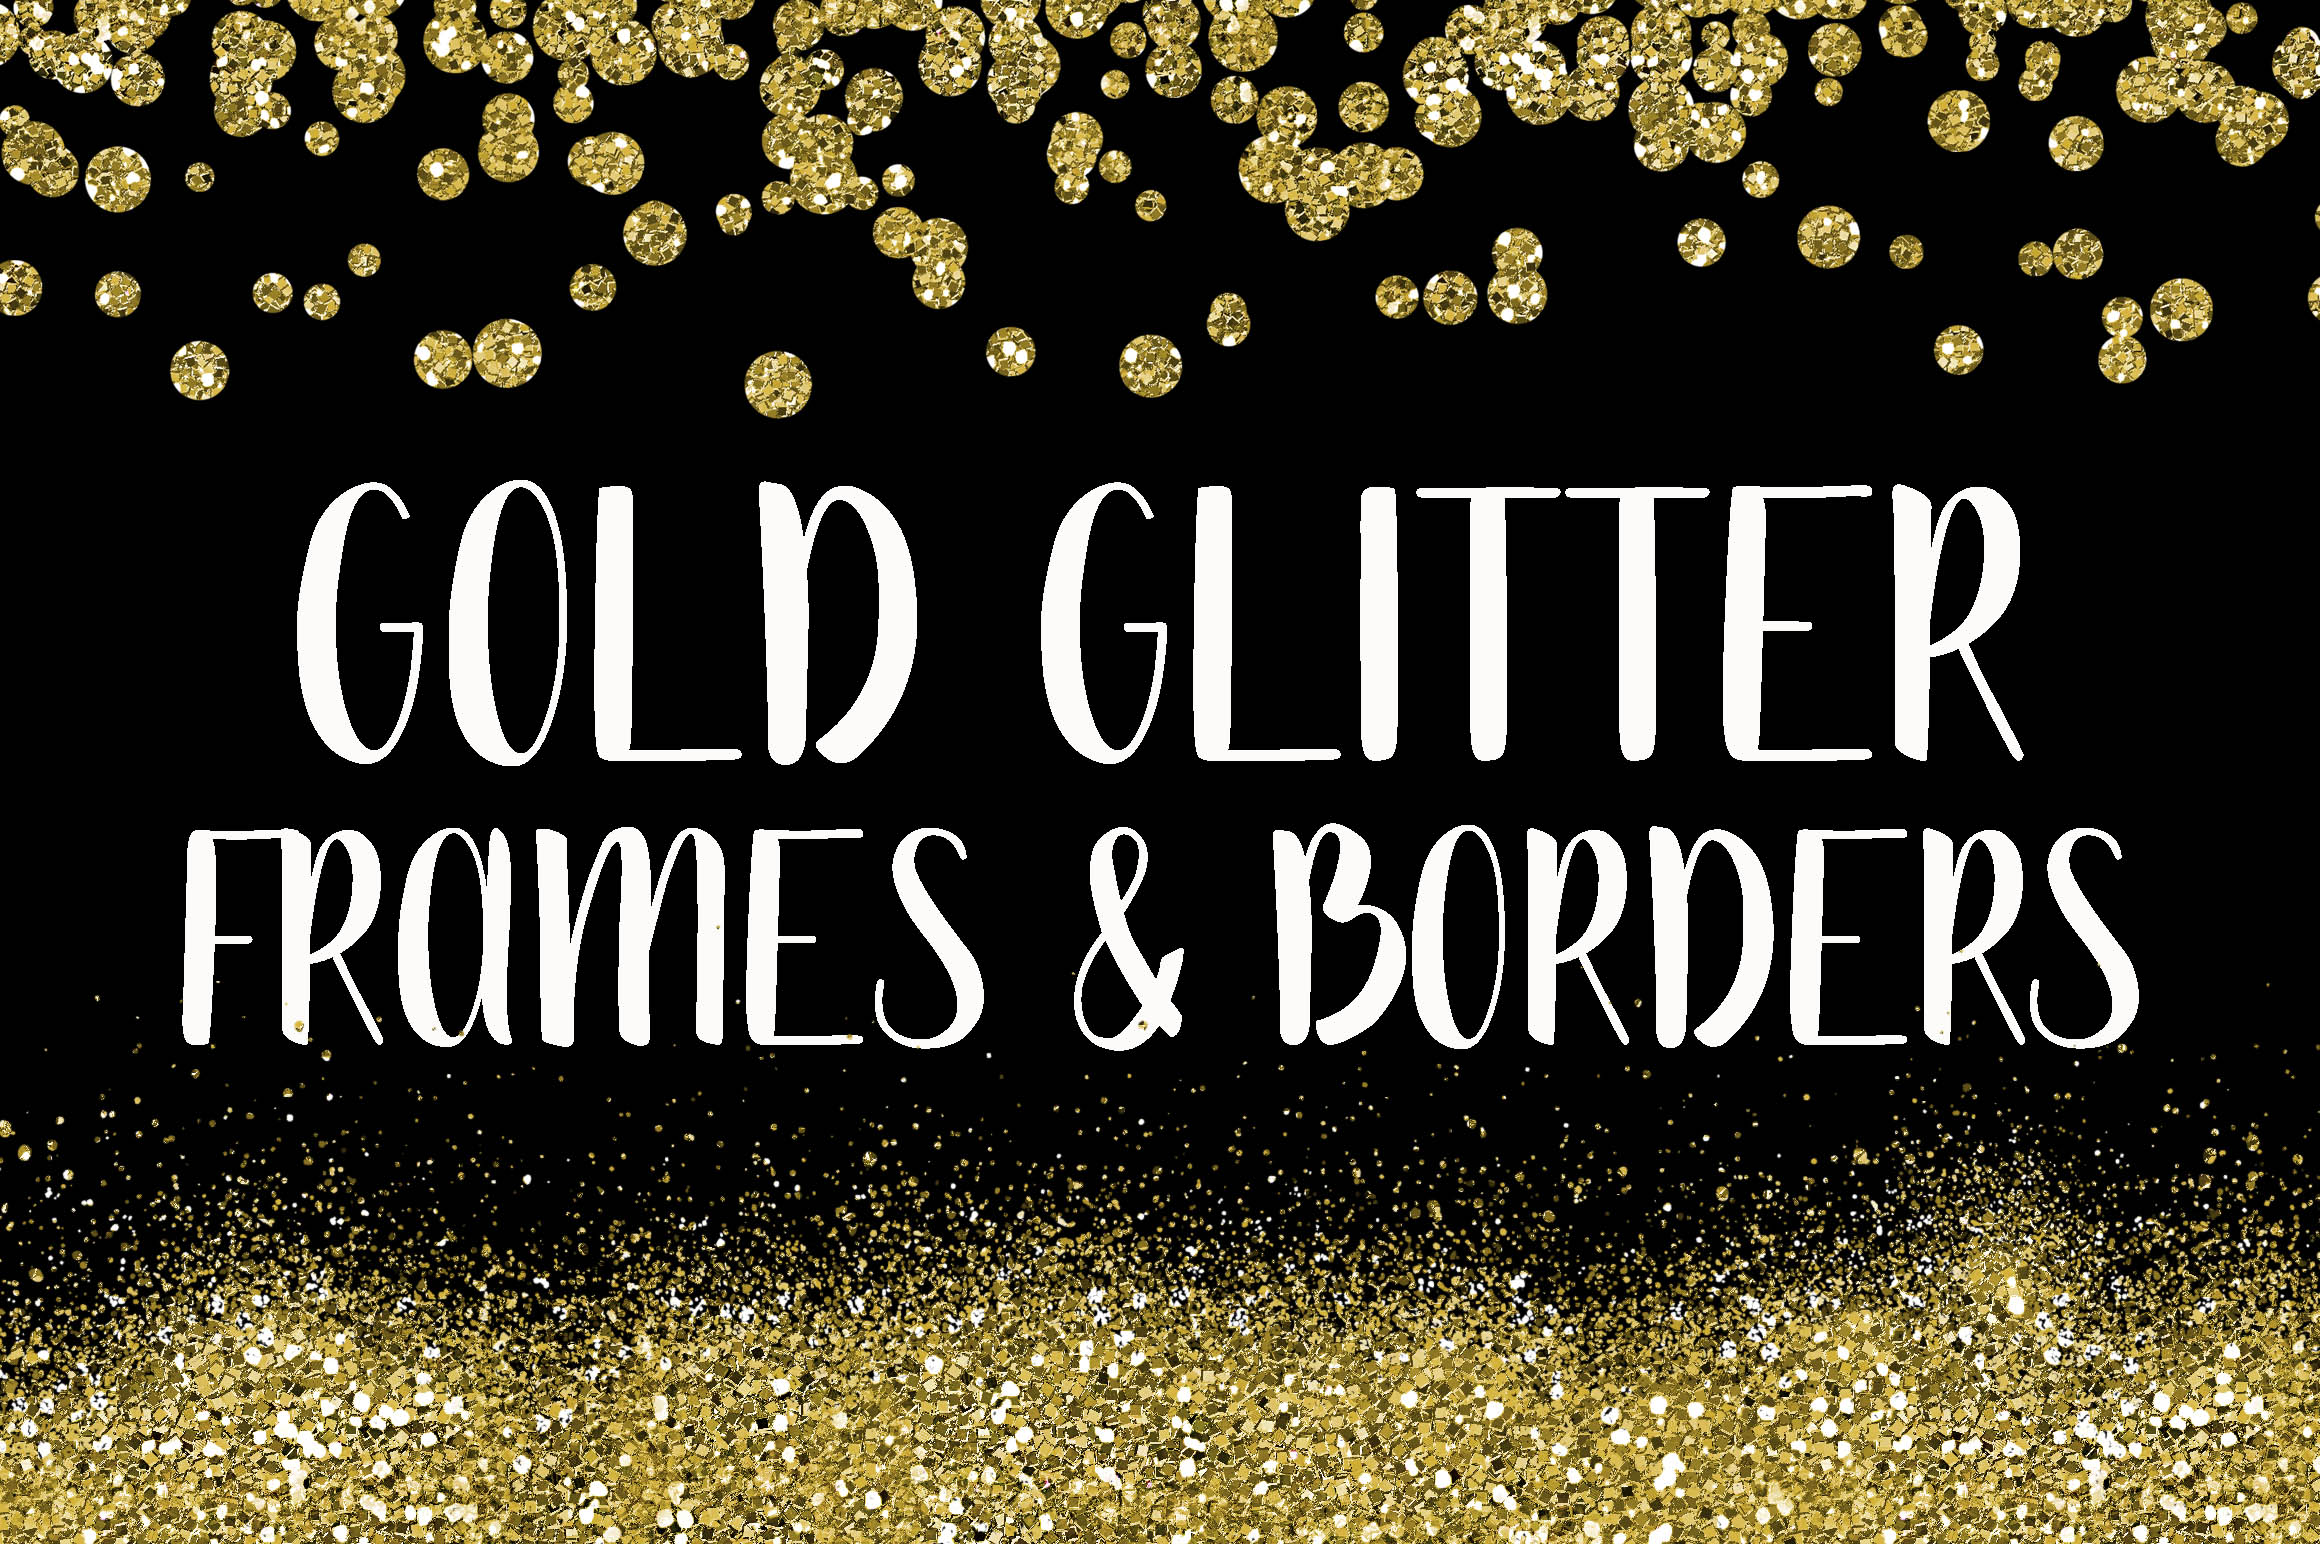 Download Gold Glitter Frames and Borders PNG Clipart Bundle (42983 ...